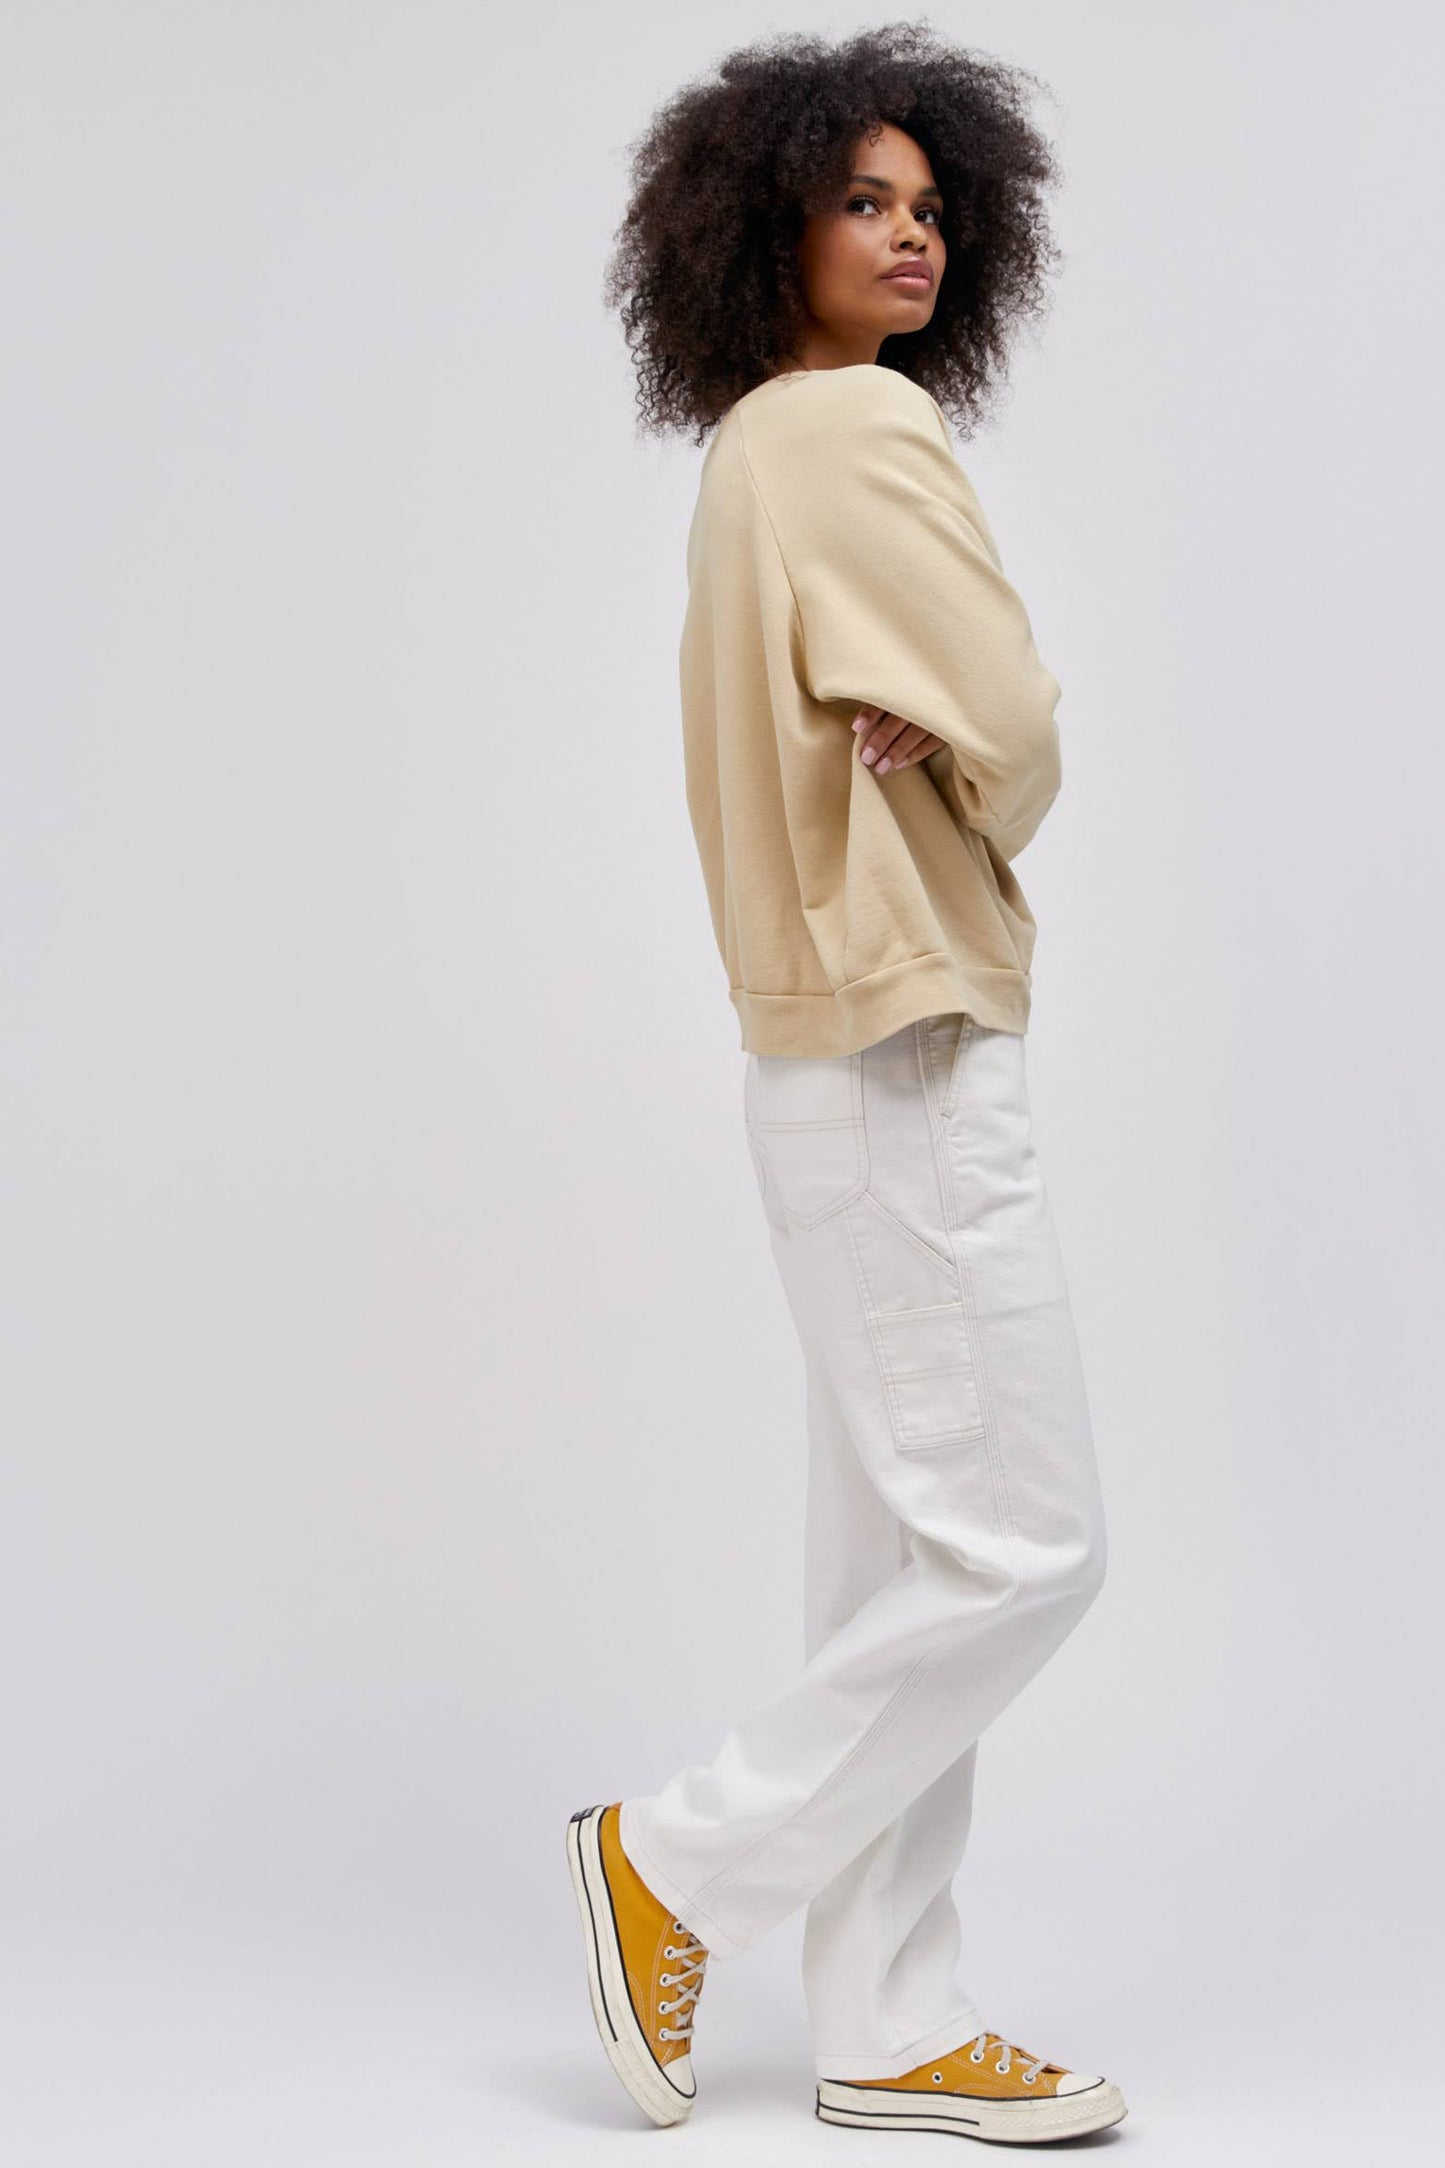 curly haired model in sideways arm crossed pose wearing khaki colored sweatshirt and white workwear pants